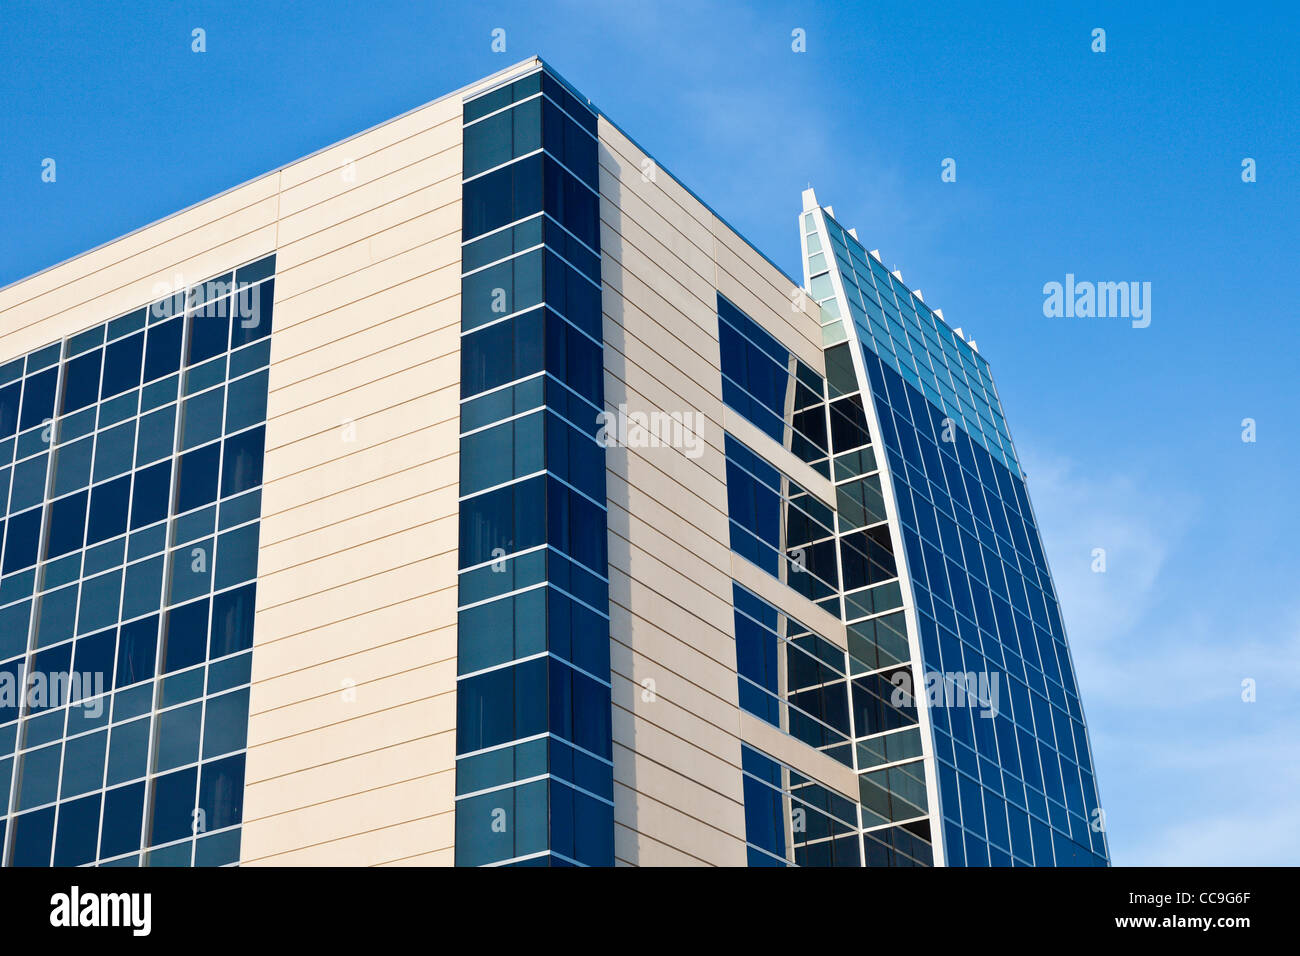 Architectural details of office building in Orlando, FL Stock Photo